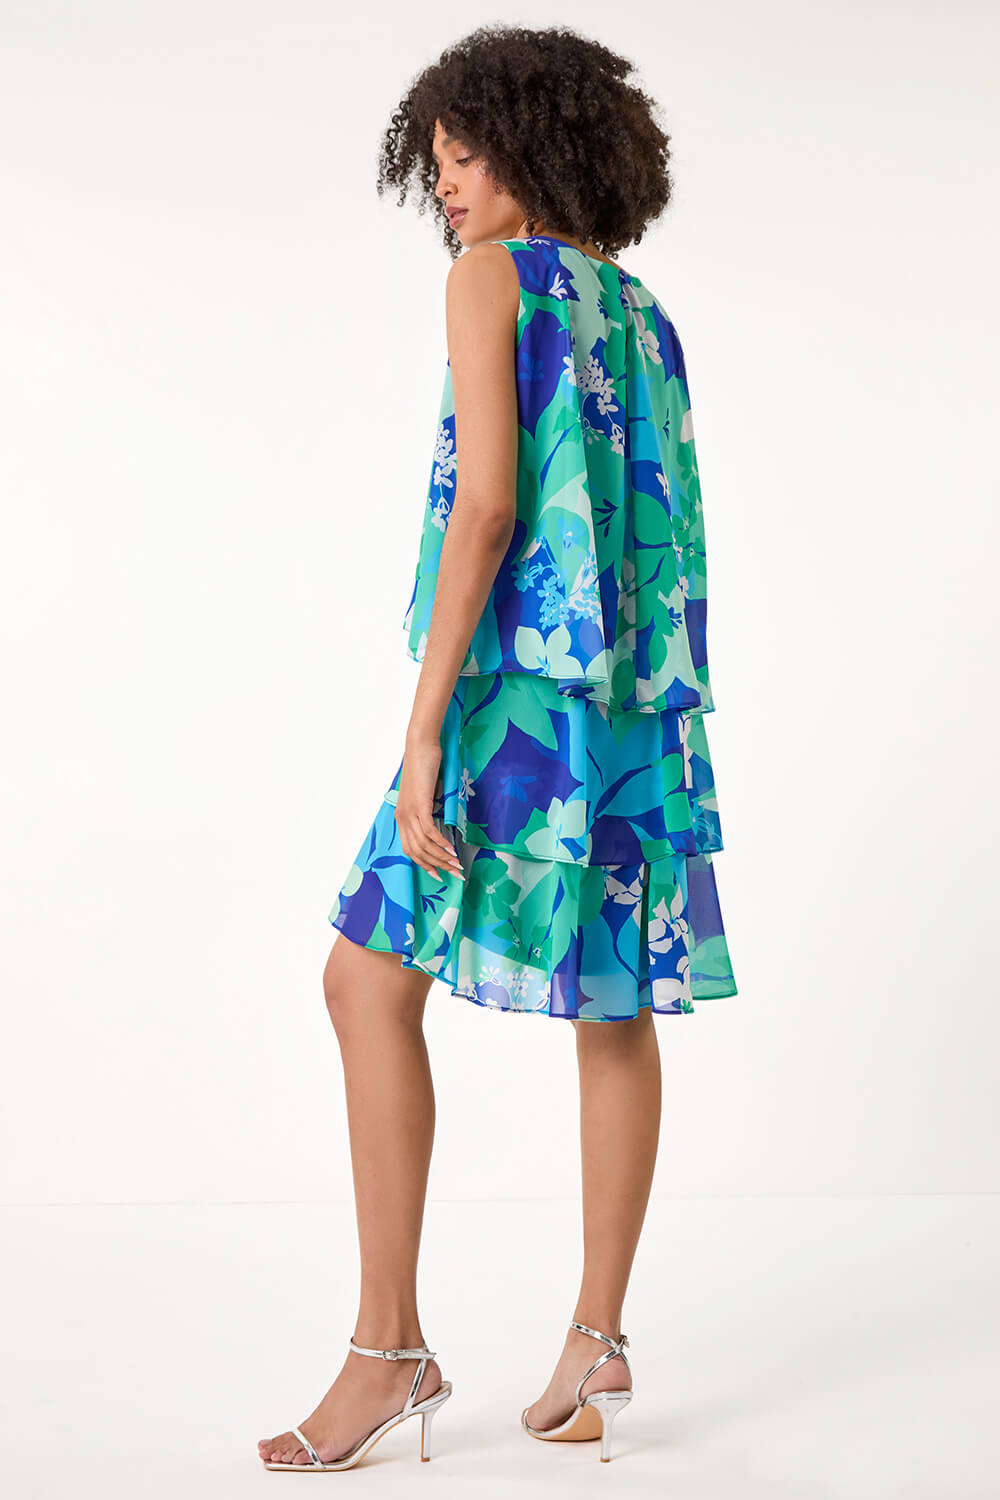 Blue Floral Print Tiered Layer Dress, Image 3 of 5